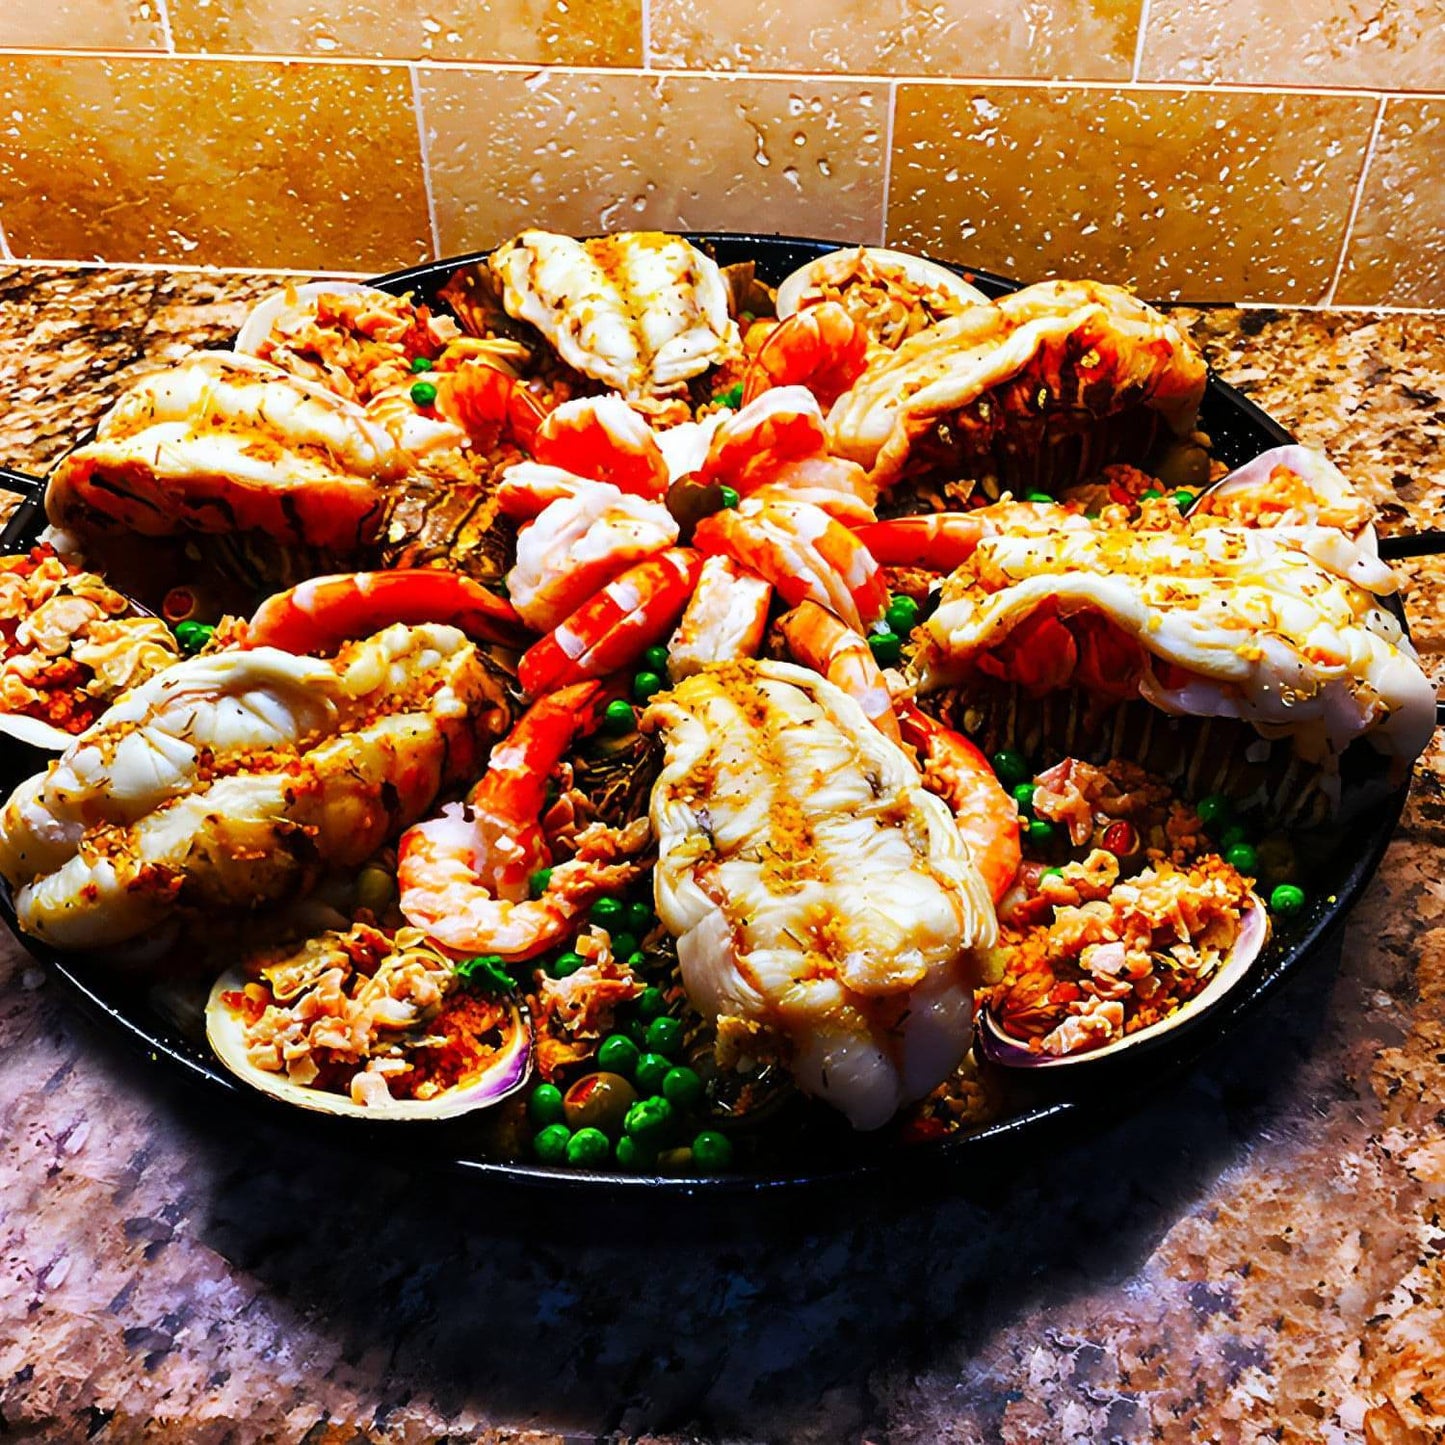 Paella de Langosta Key West Especial - Special paella. Key West lobster tails, stuffed Cherry clams and colossal shrimp fountain.